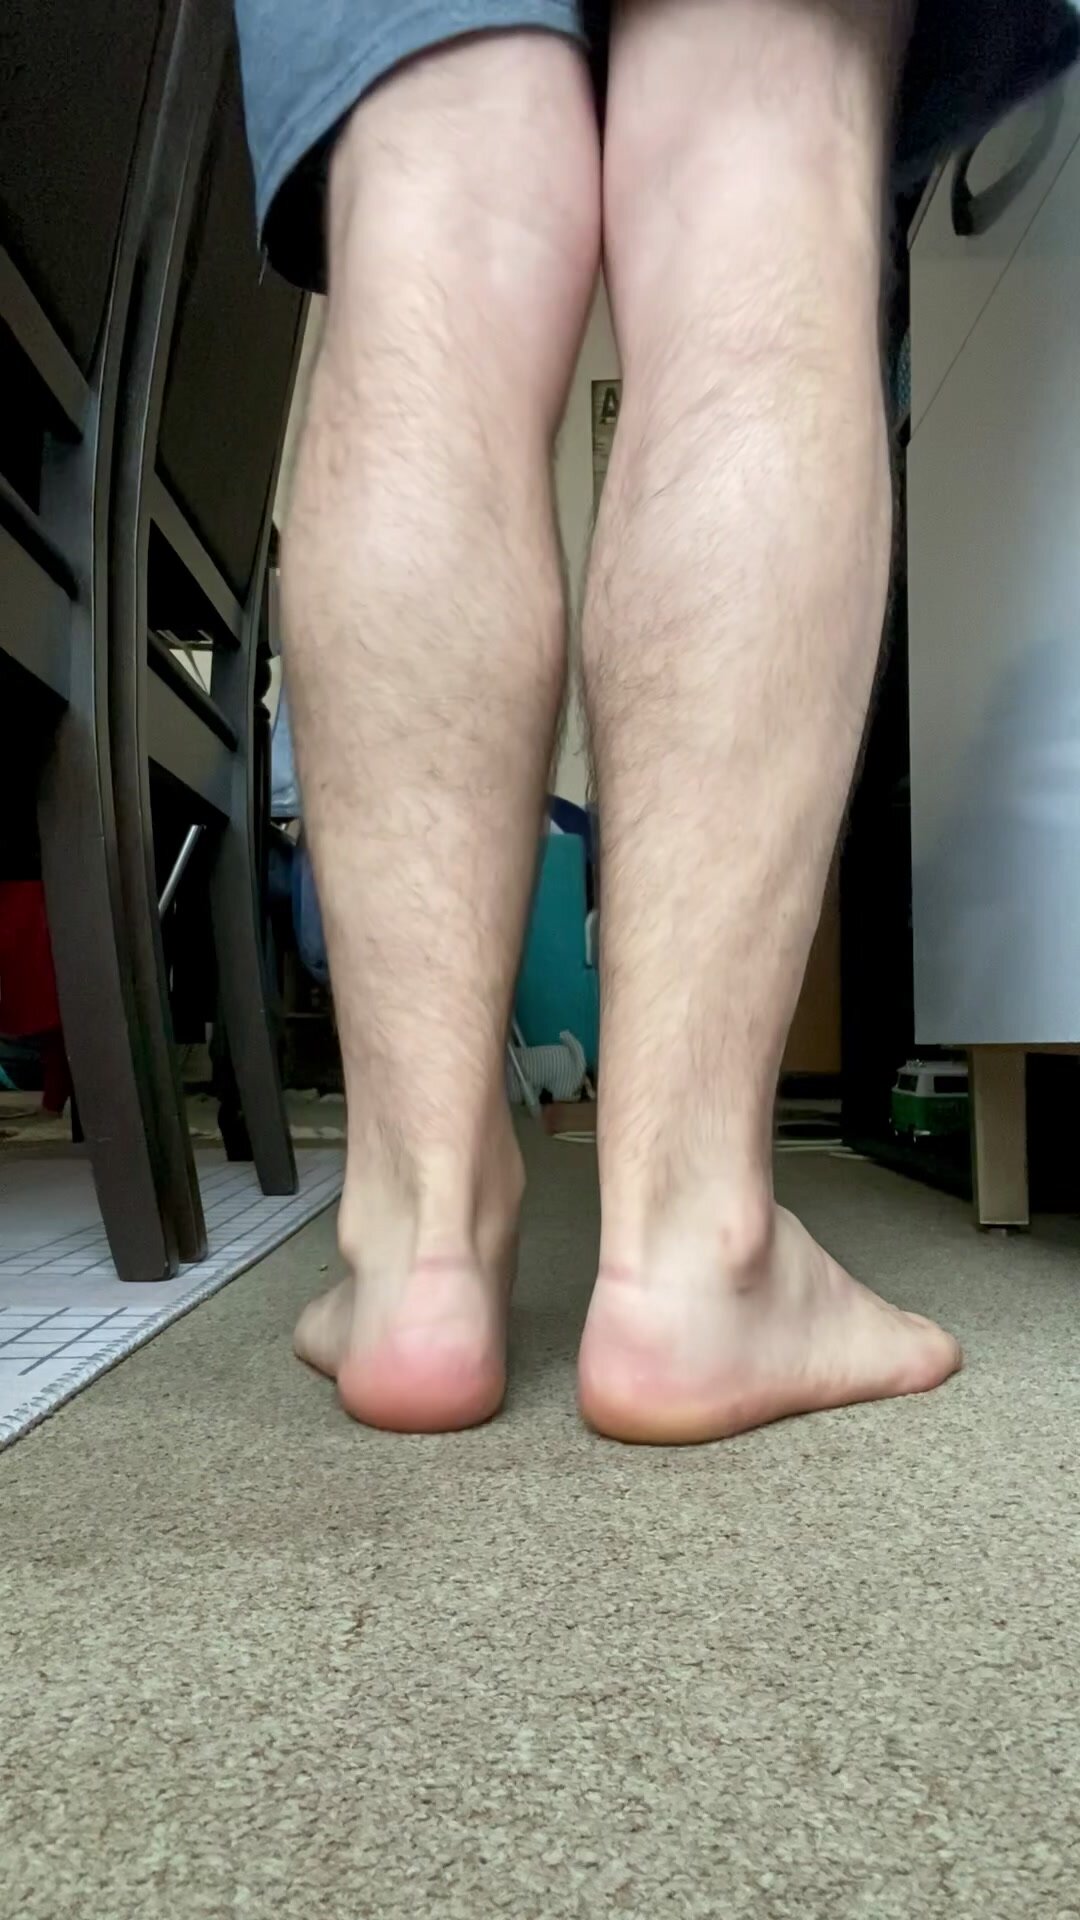 Playing with my feet - video 2